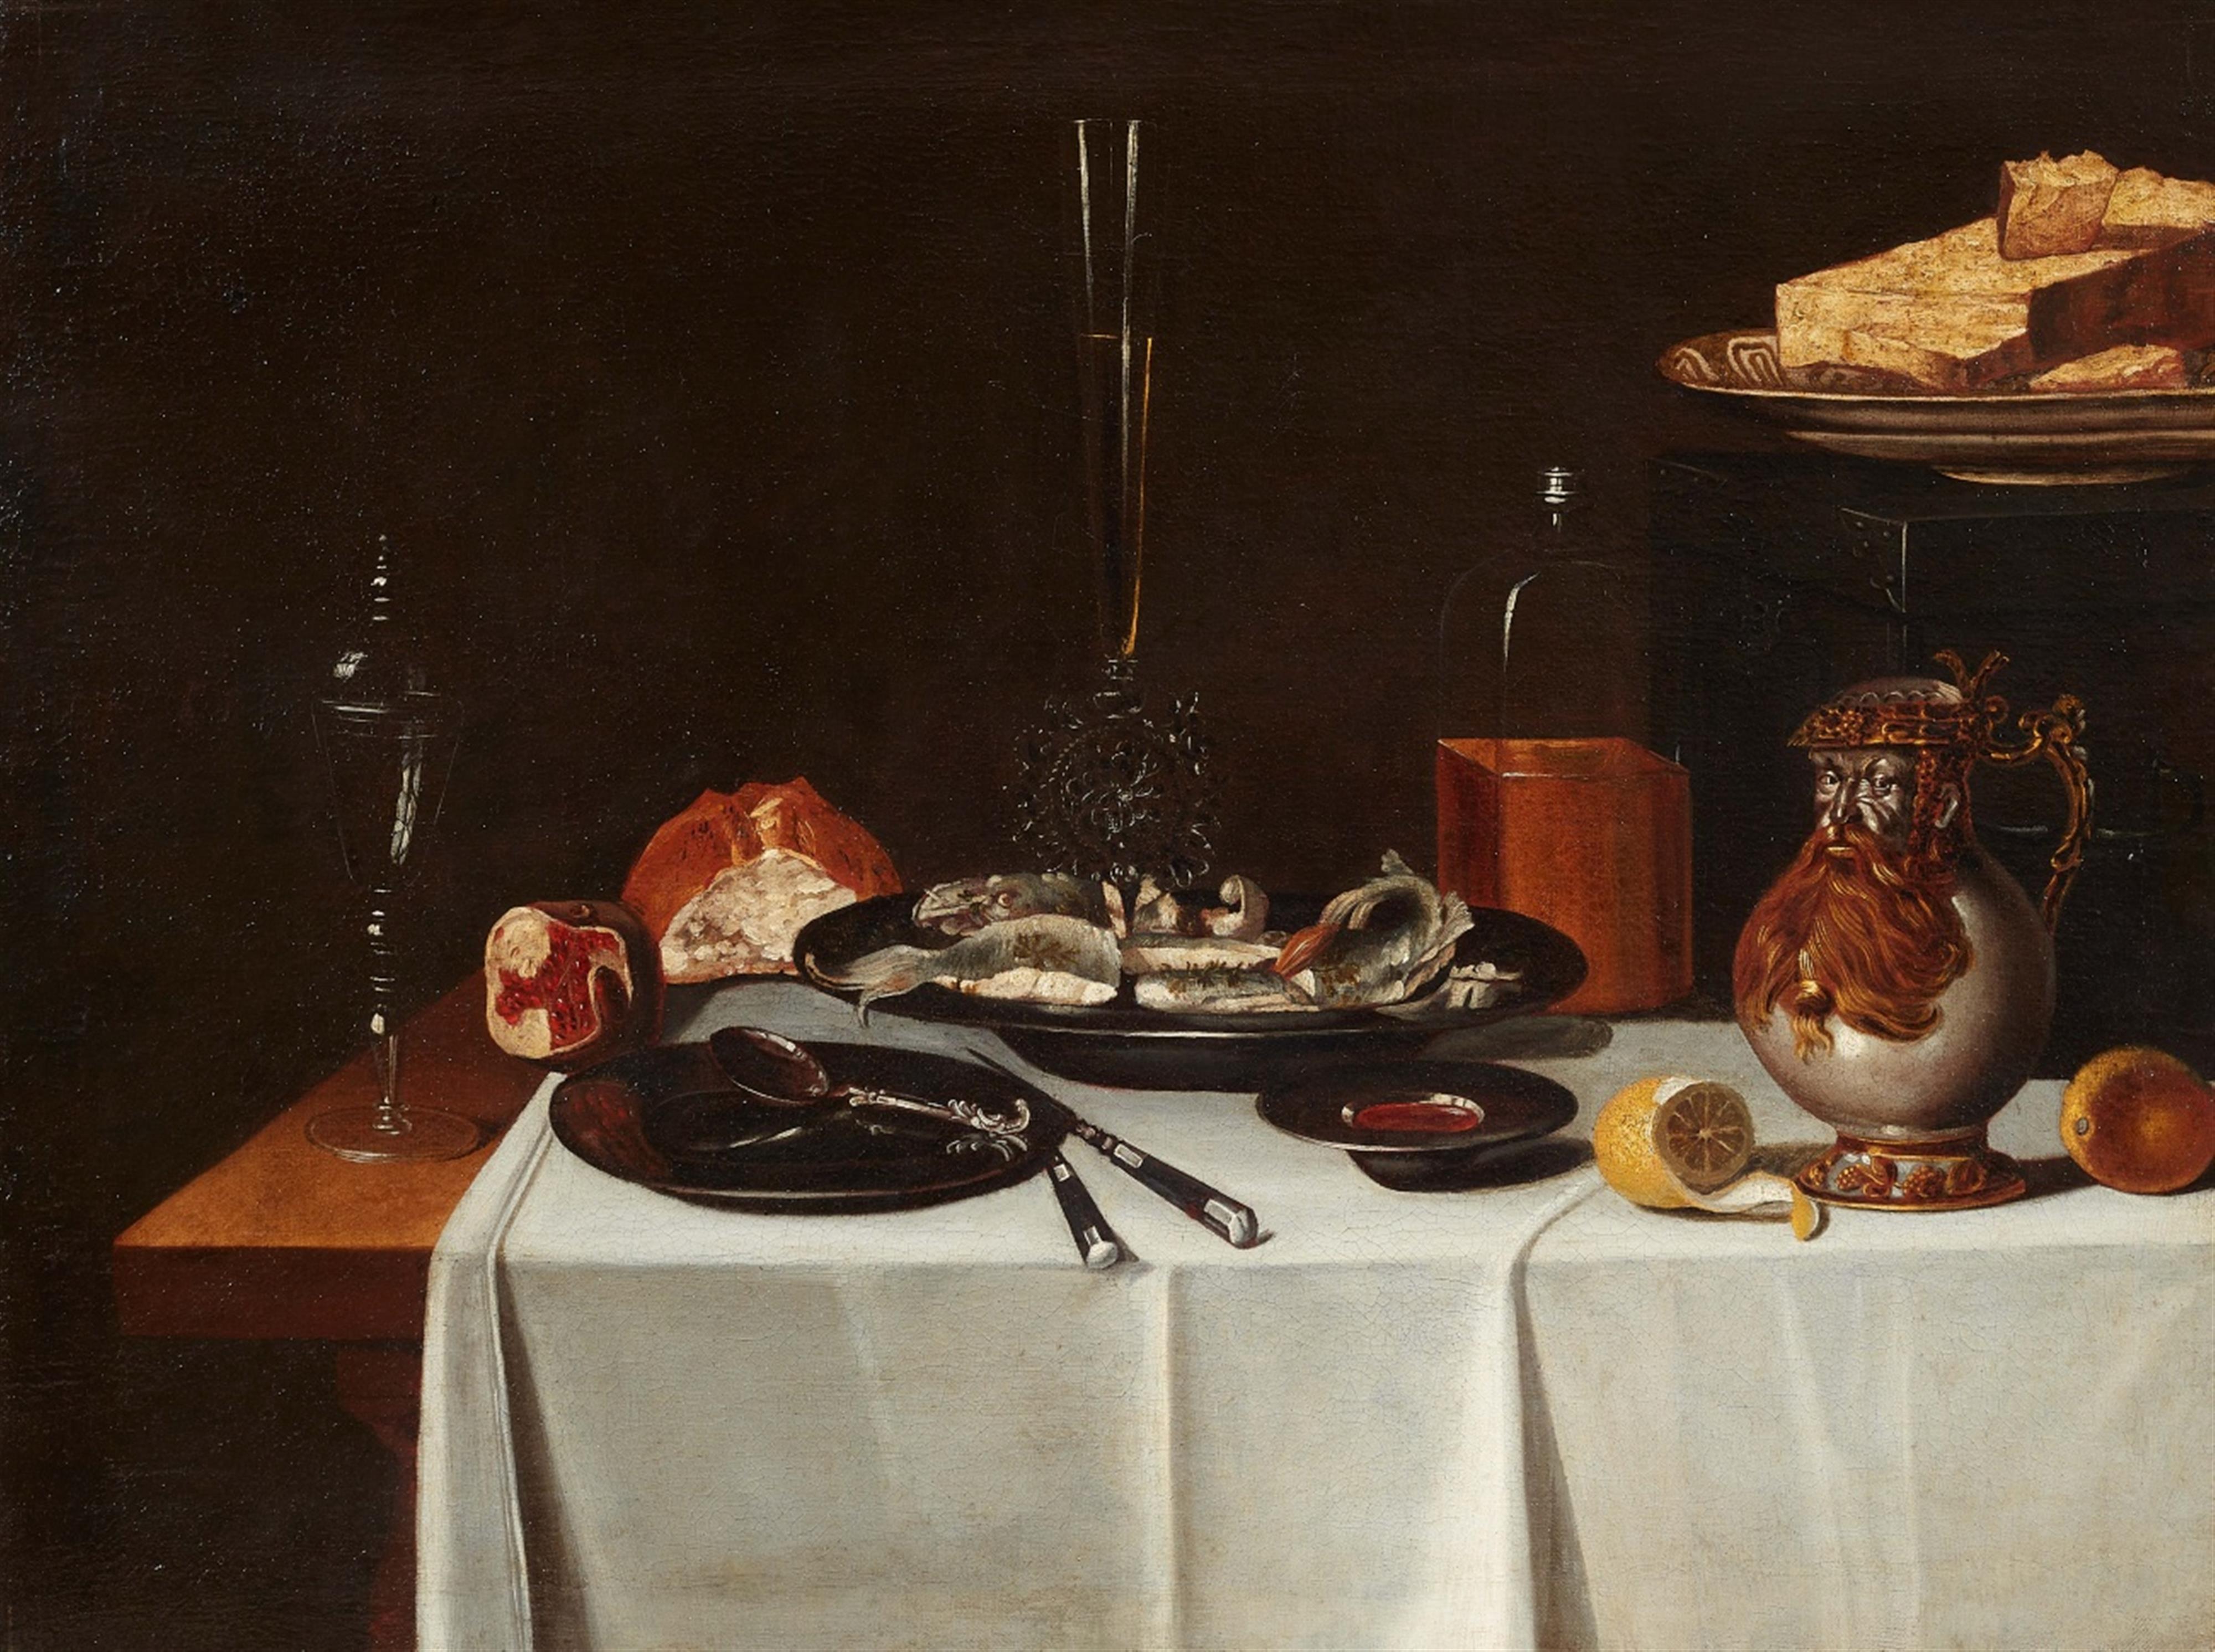 Netherlandish School 17th century - Large Dinner Still Life with a Bellarmine, Venetian Glass, and a Glass Goblet - image-1